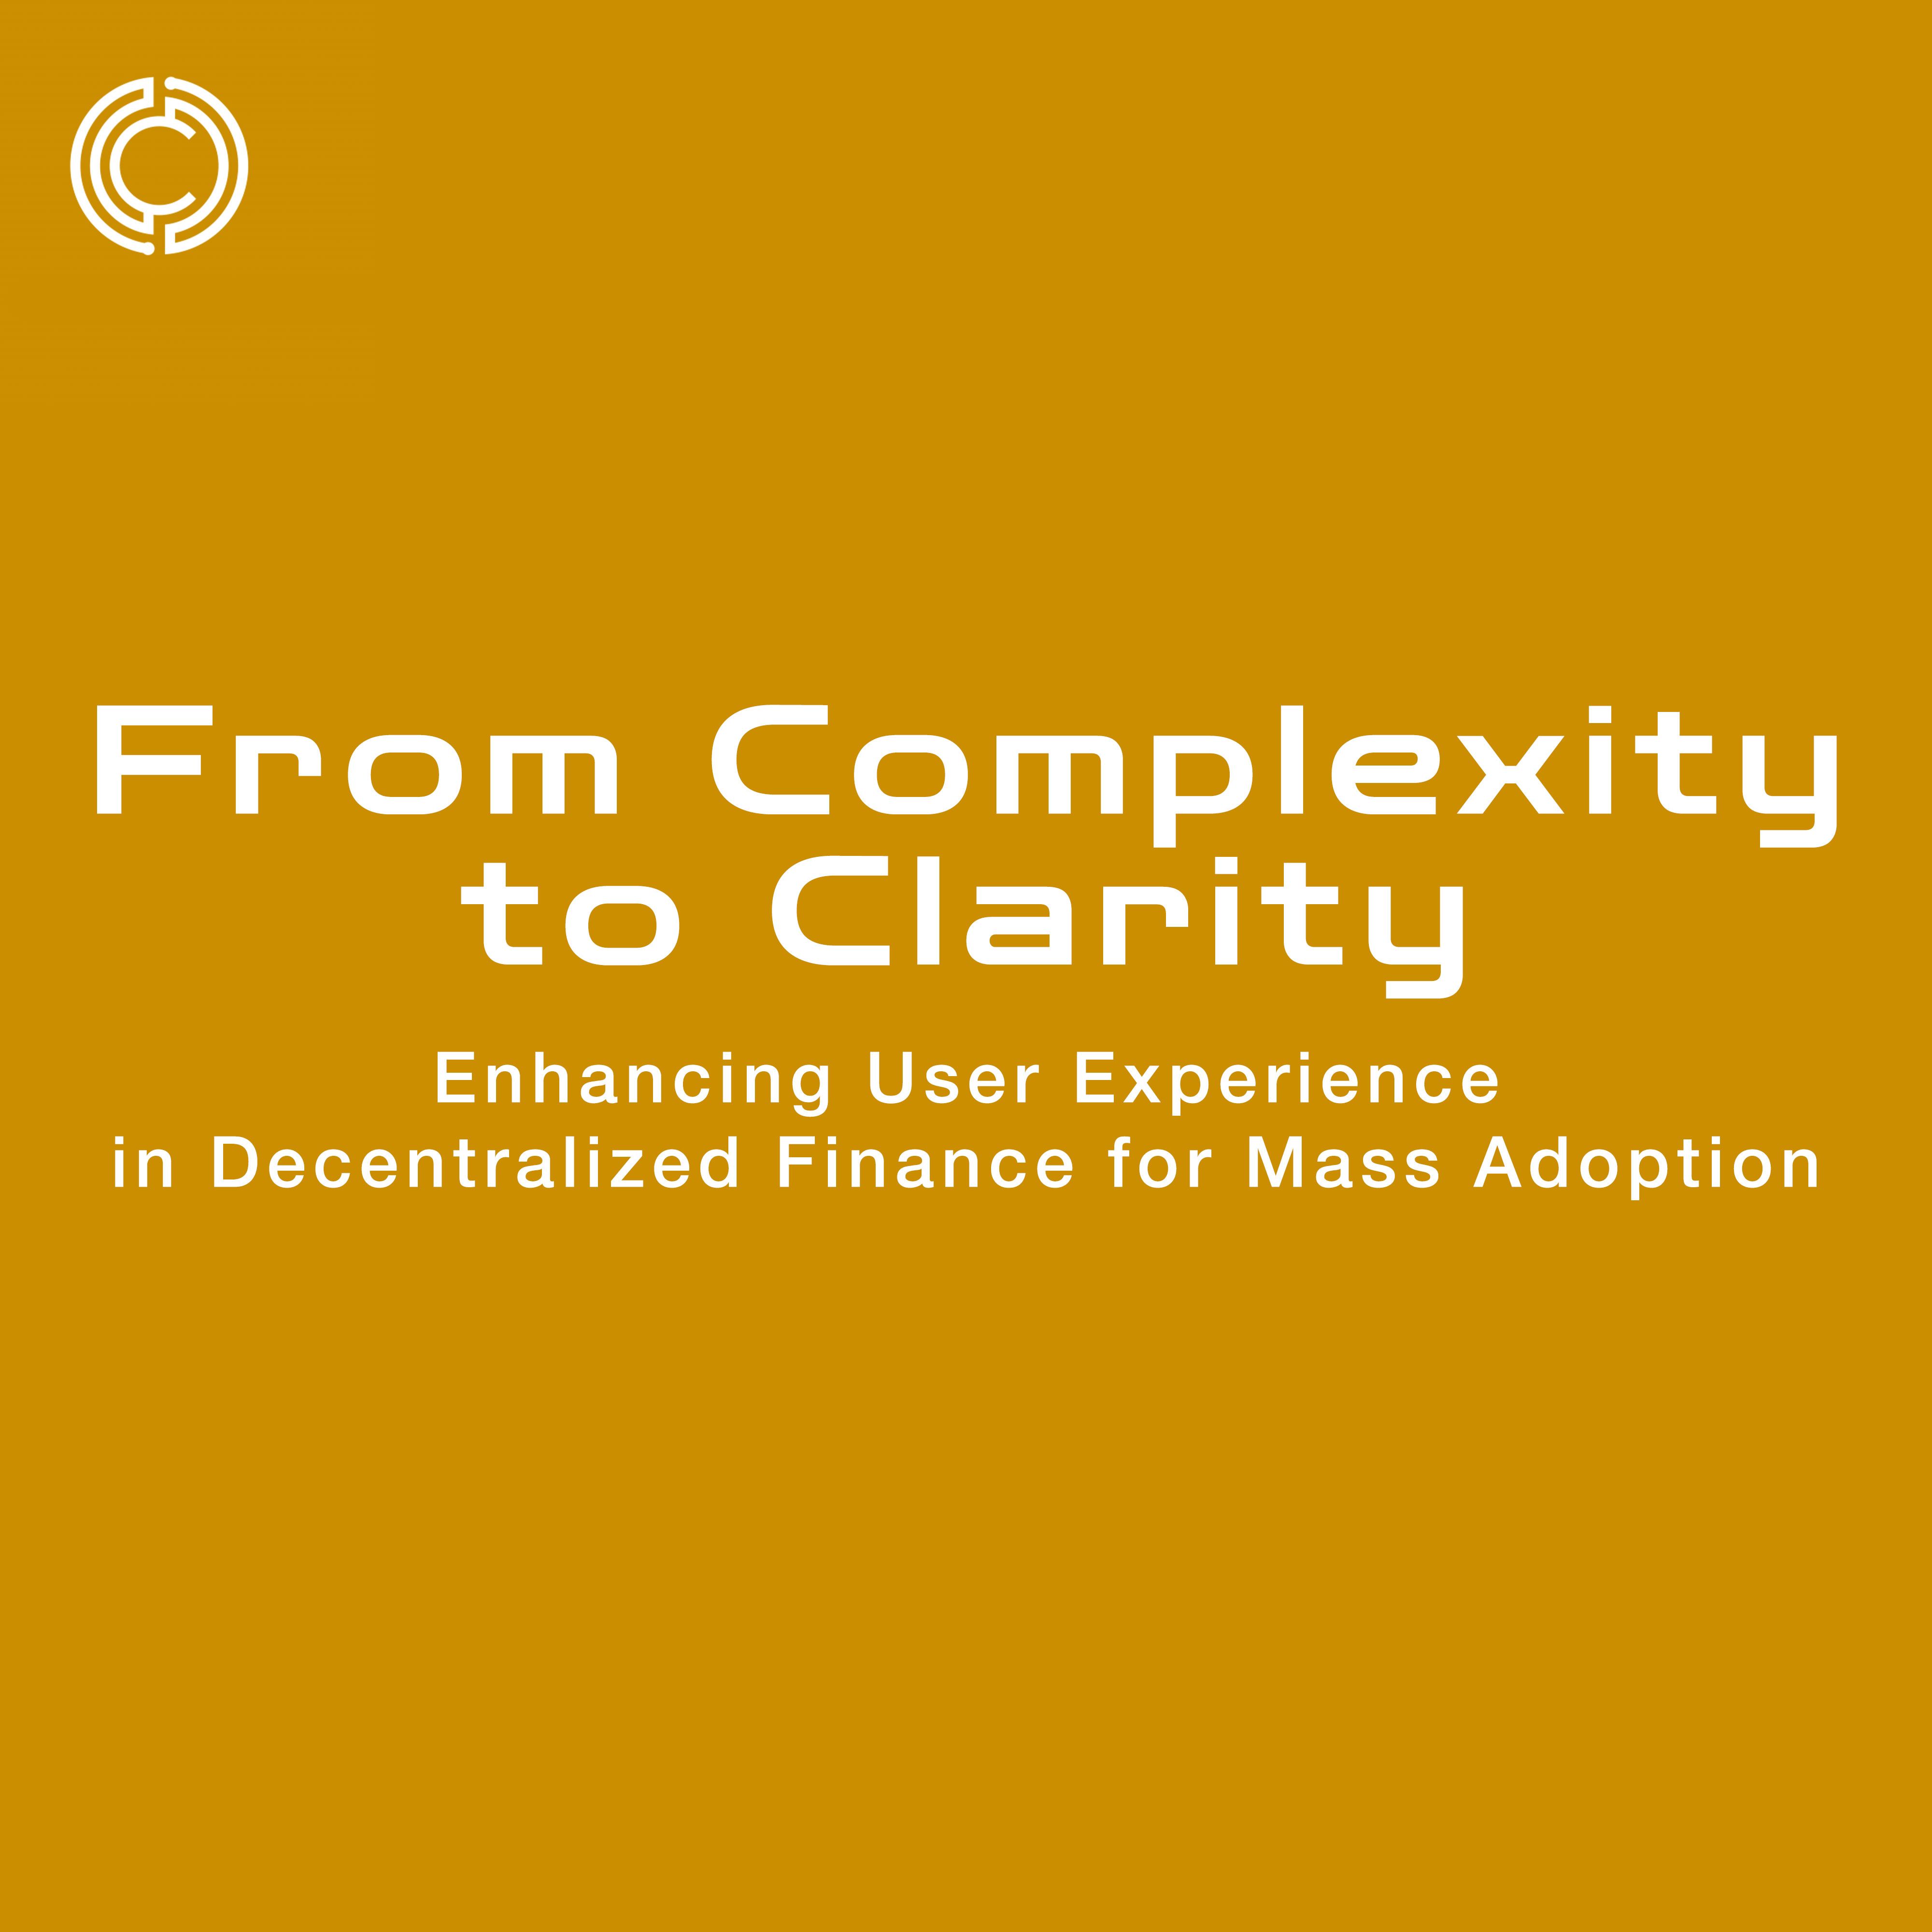 From Complexity to Clarity: Enhancing User Experience in Decentralized Finance for Mass Adoption